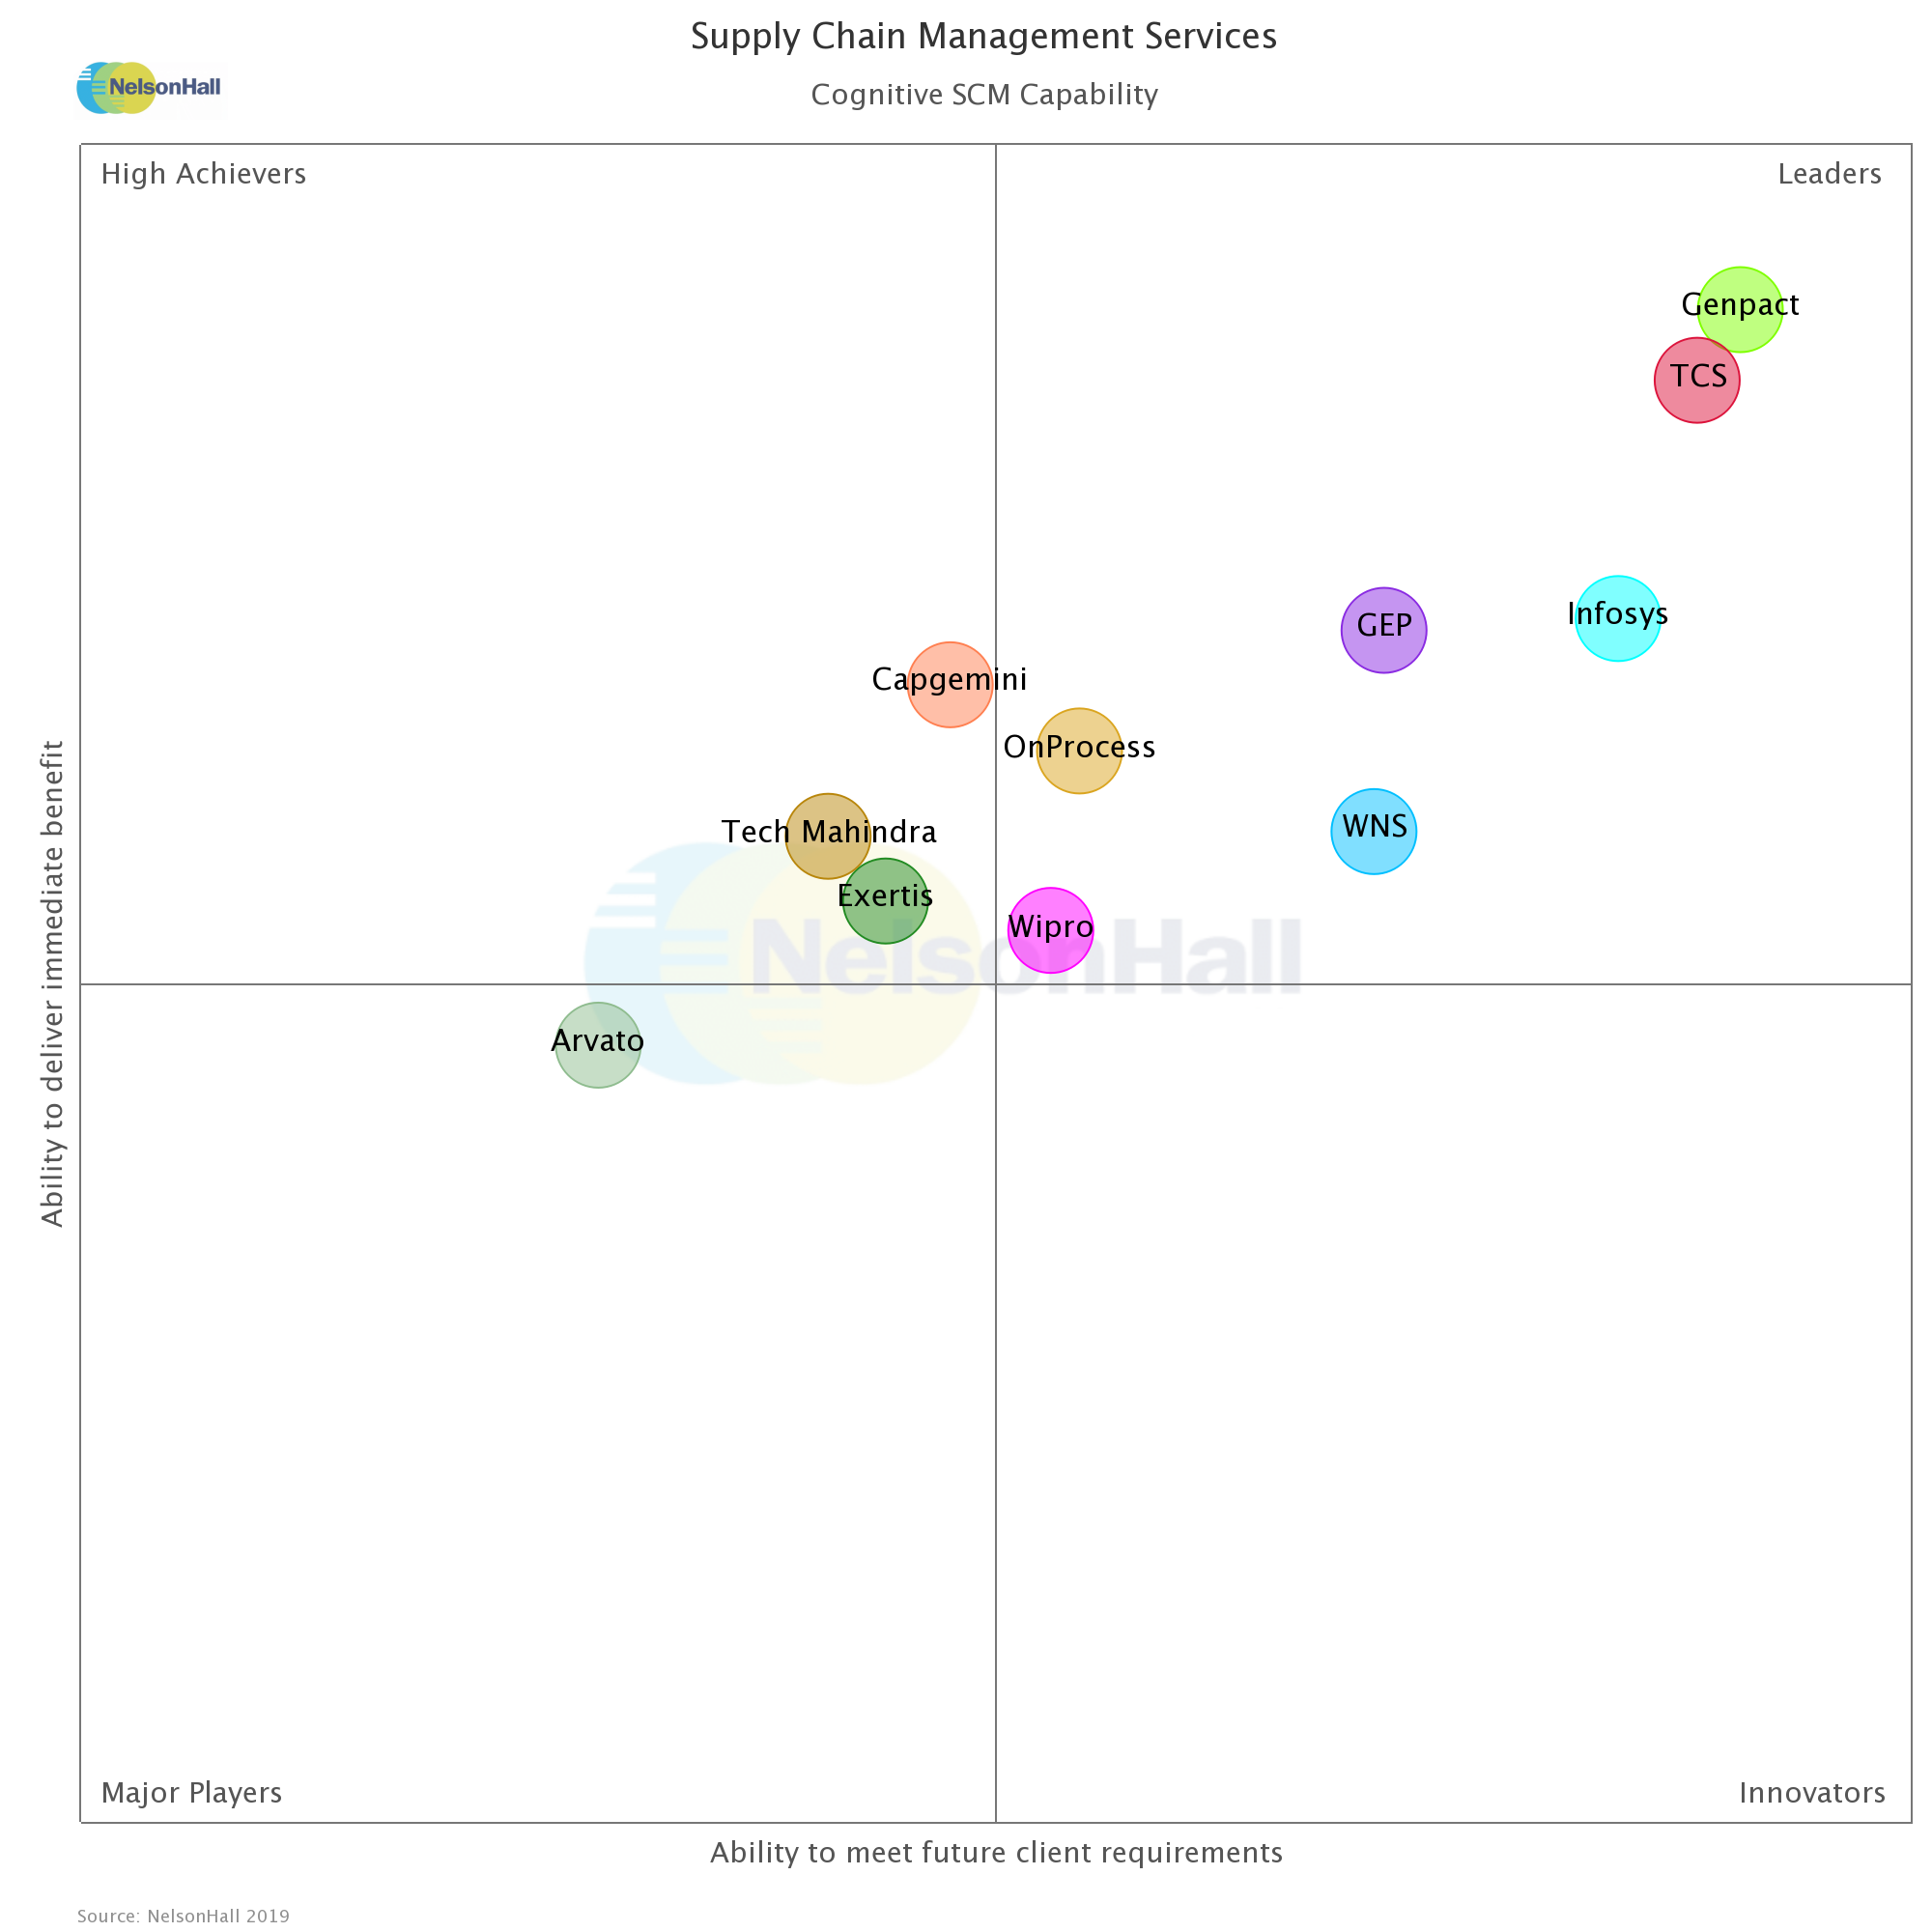 Wipro recognized as a Leader in NelsonHall NEAT vendor evaluation for Supply Chain Management (SCM) Services in the Cognitive SCM Capability market segment 